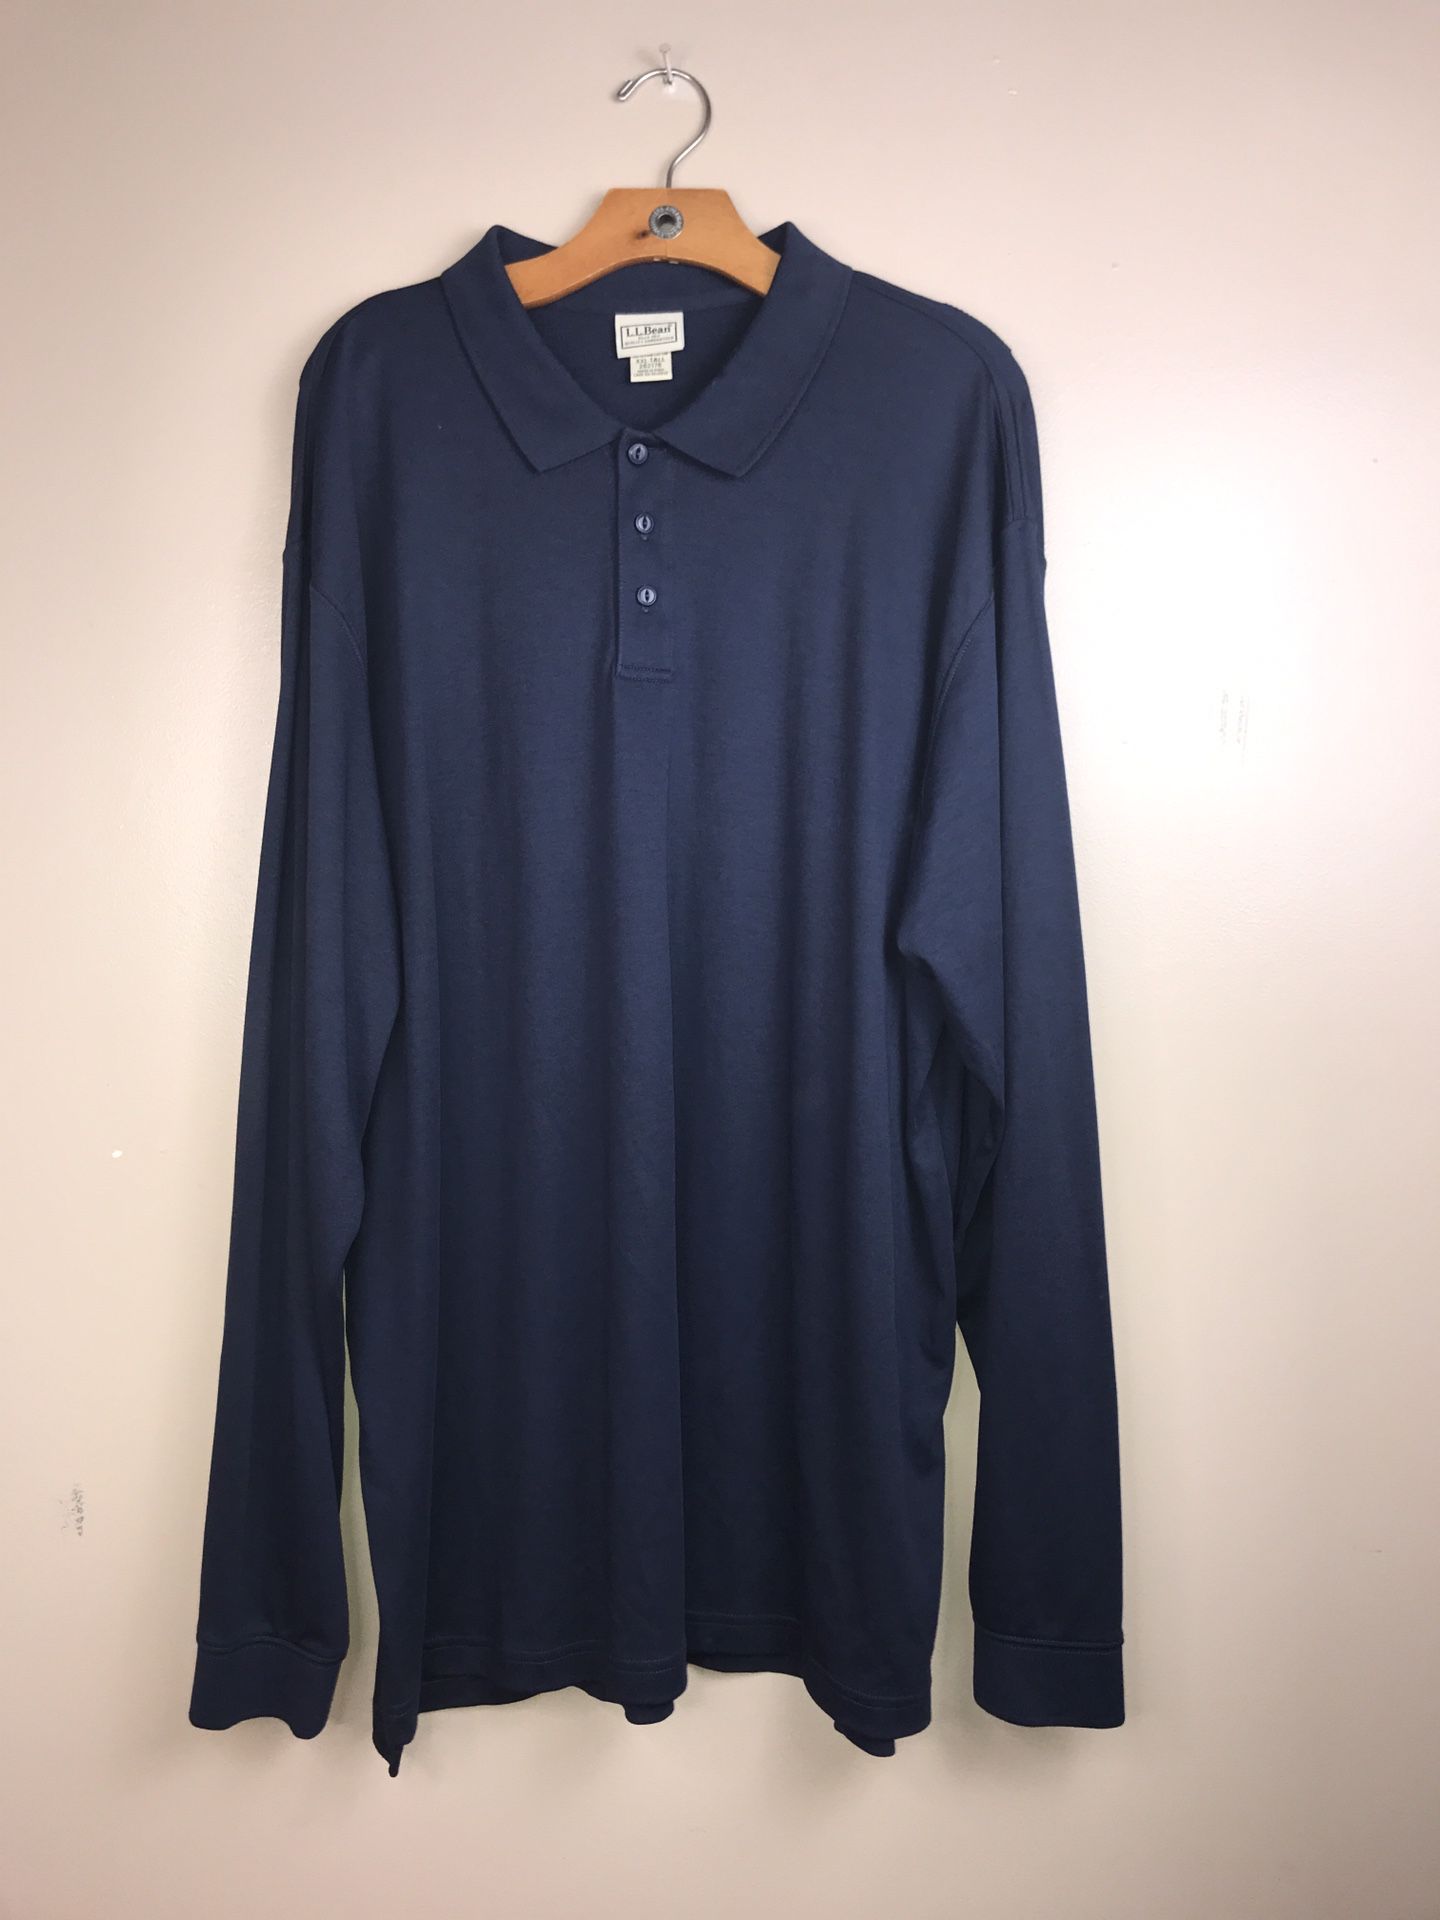 LLBean Traditional Fit Blue Long Sleeve Pullover Shirt, Size XXL Tall